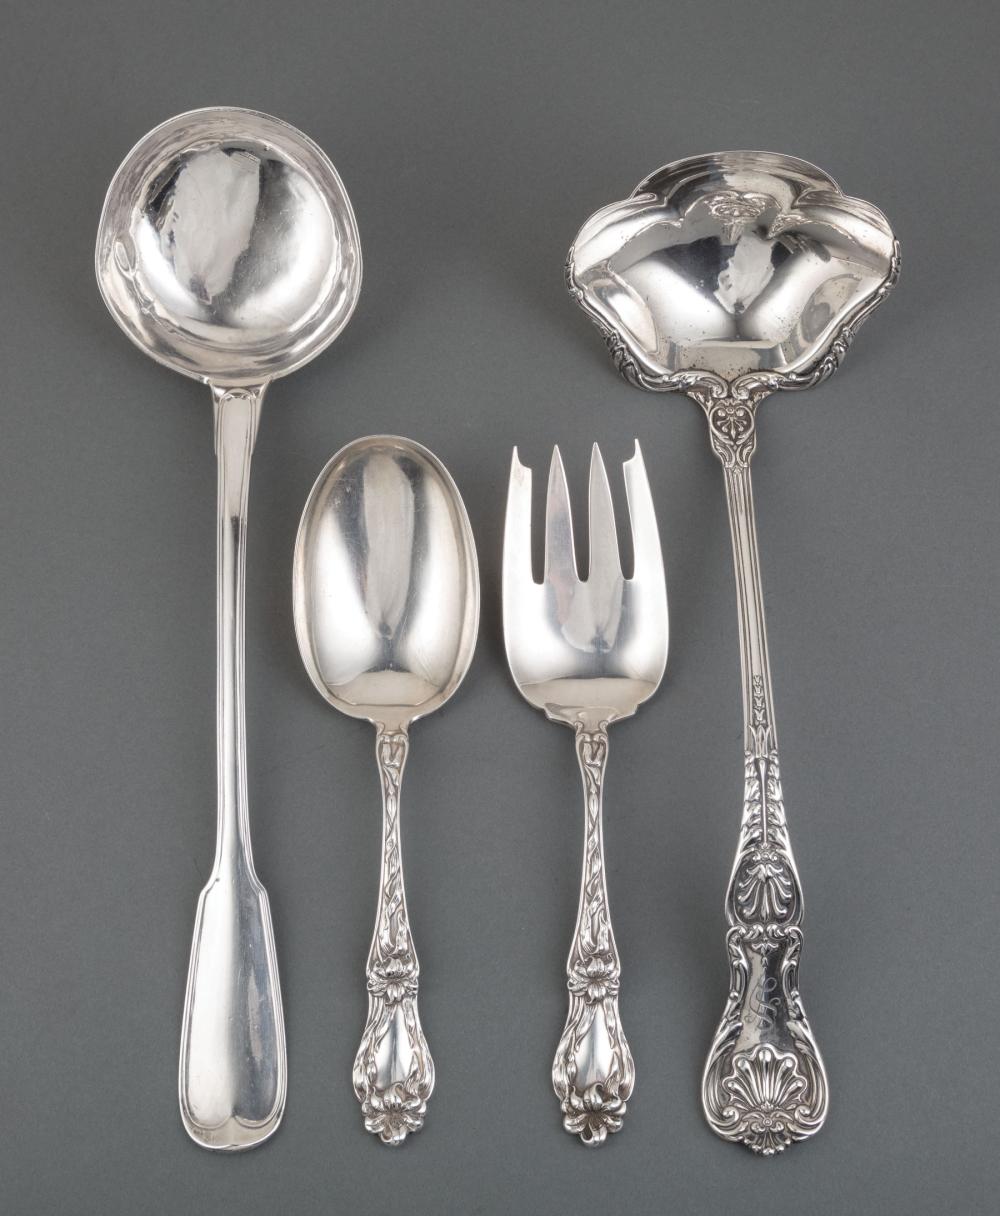 GROUP OF SILVER FLATWARE SERVING 31ca40